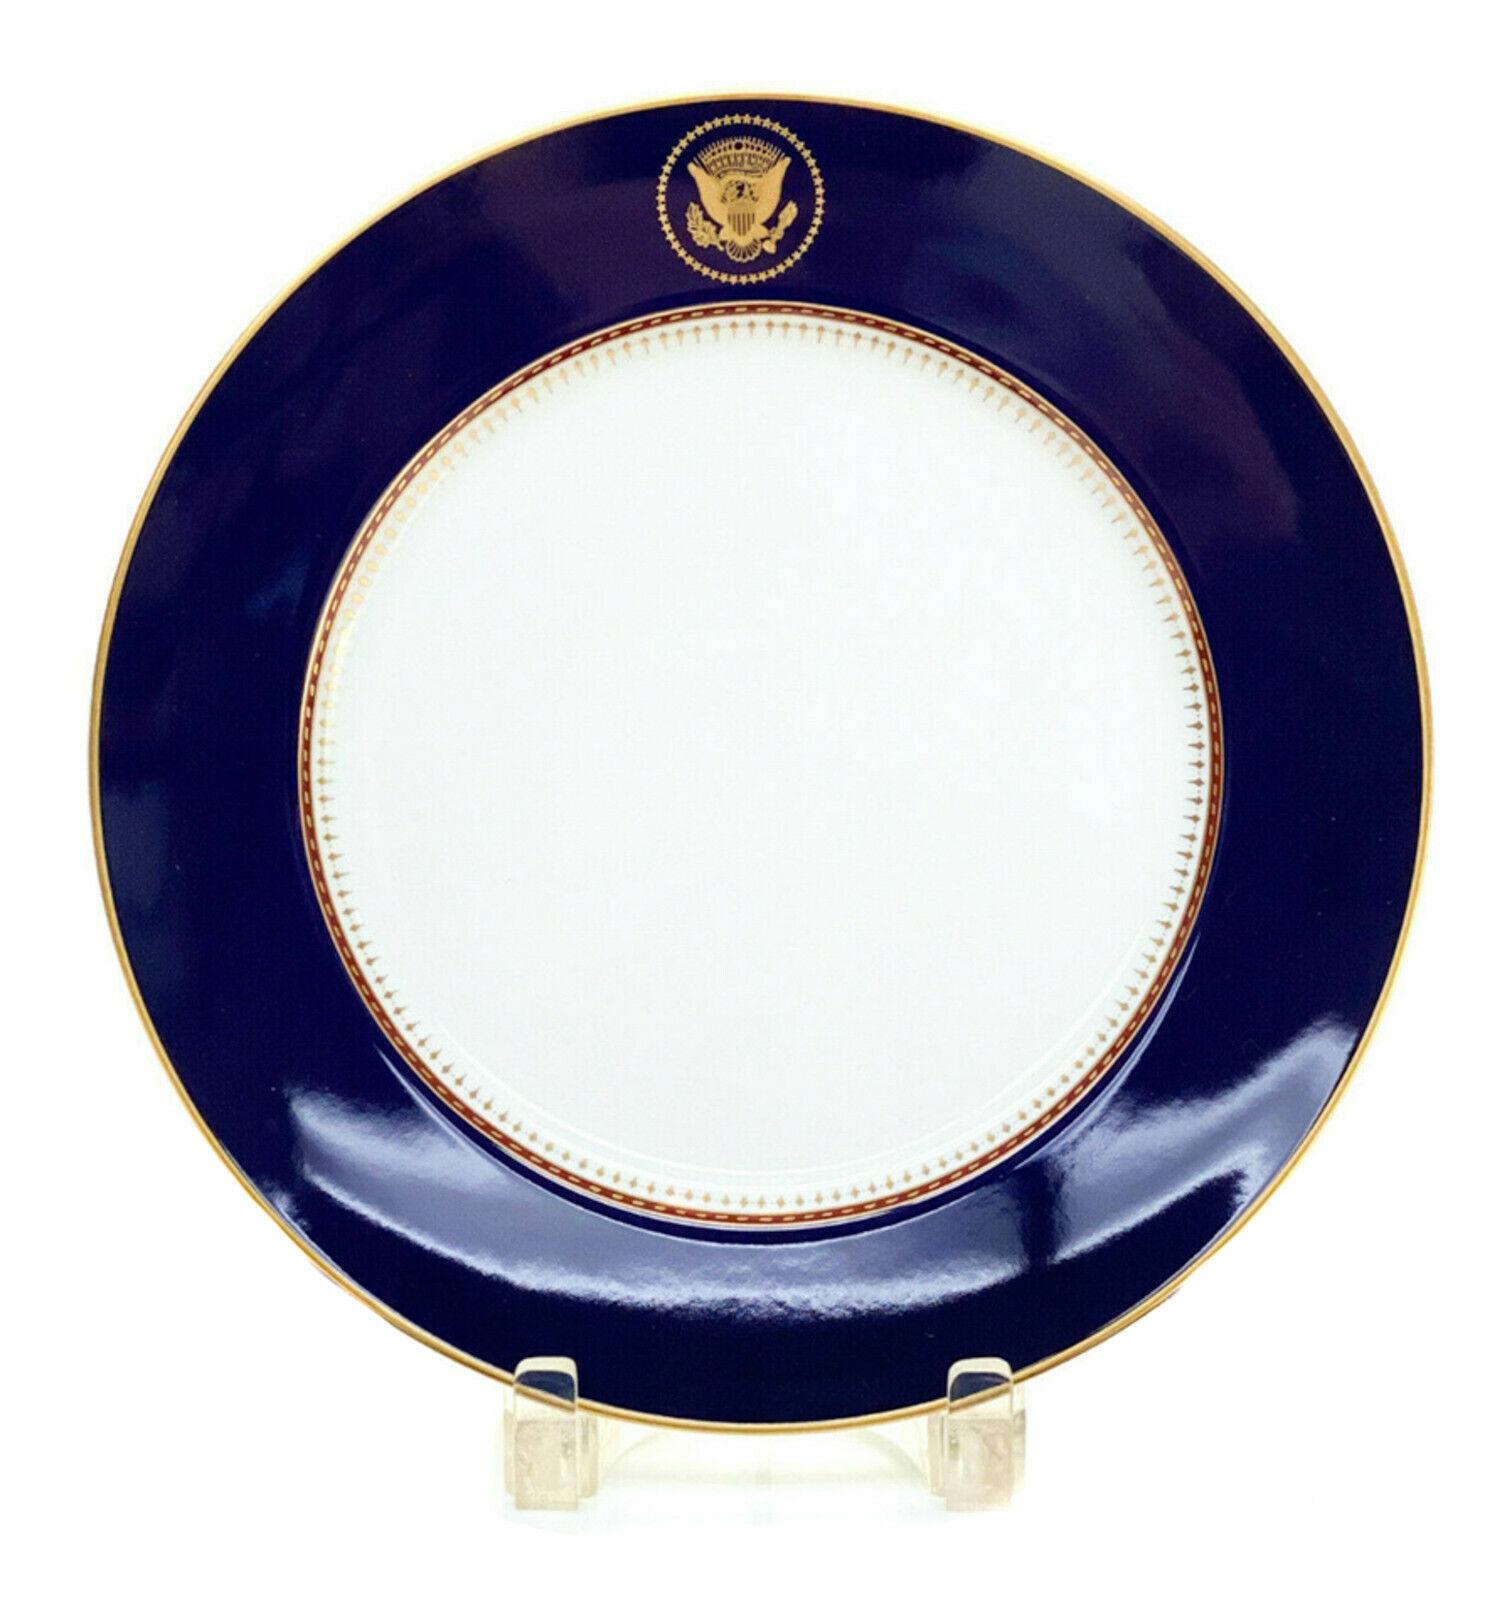 Fitz and Floyd Reagan White House Dinner Plate by Robert C. Floyd, 1983 In Good Condition For Sale In Gardena, CA